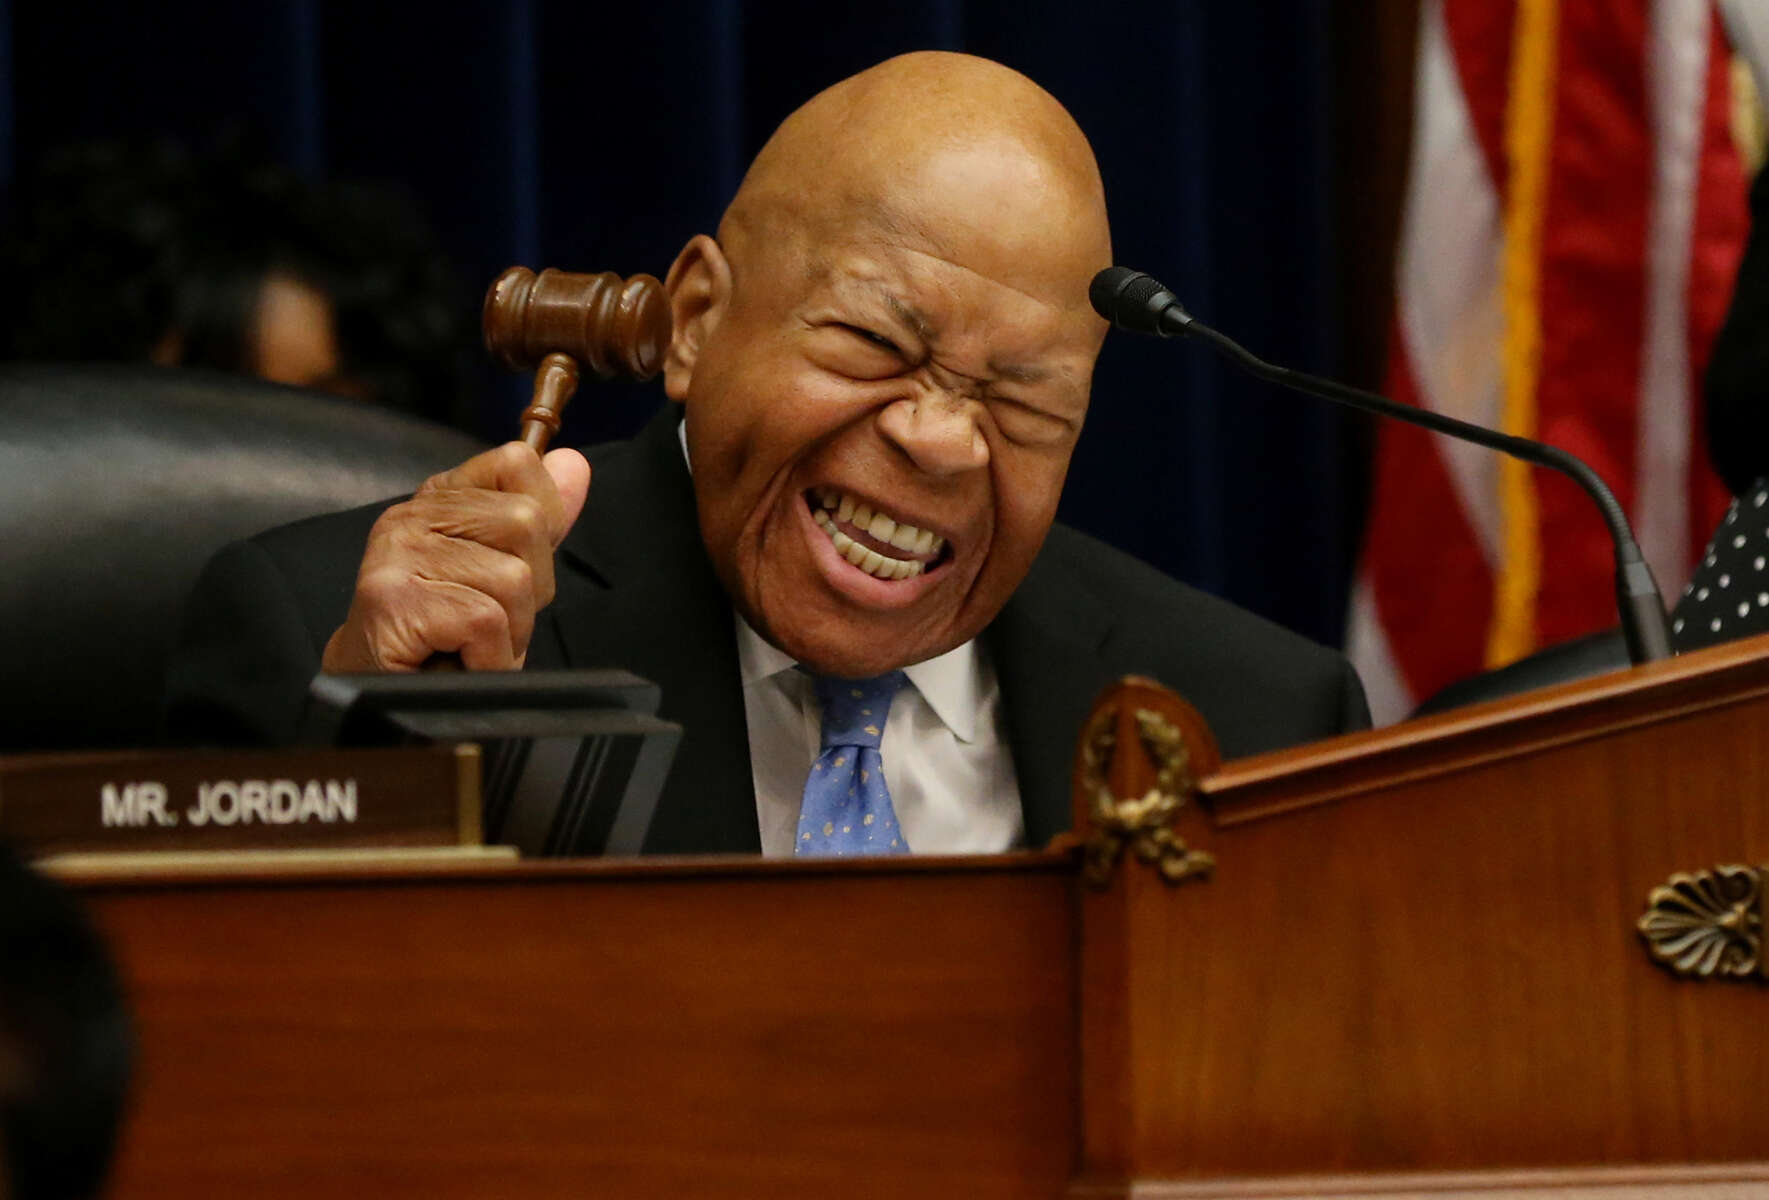 House Oversight and Reform Committee chairman Elijah Cummings (D-MD) calls for order during a hearing called {quote}Violations of the Hatch Act Under the Trump Administration{quote} by the House Oversight and Reform Committee on Capitol Hill in Washington, D.C., June 26, 